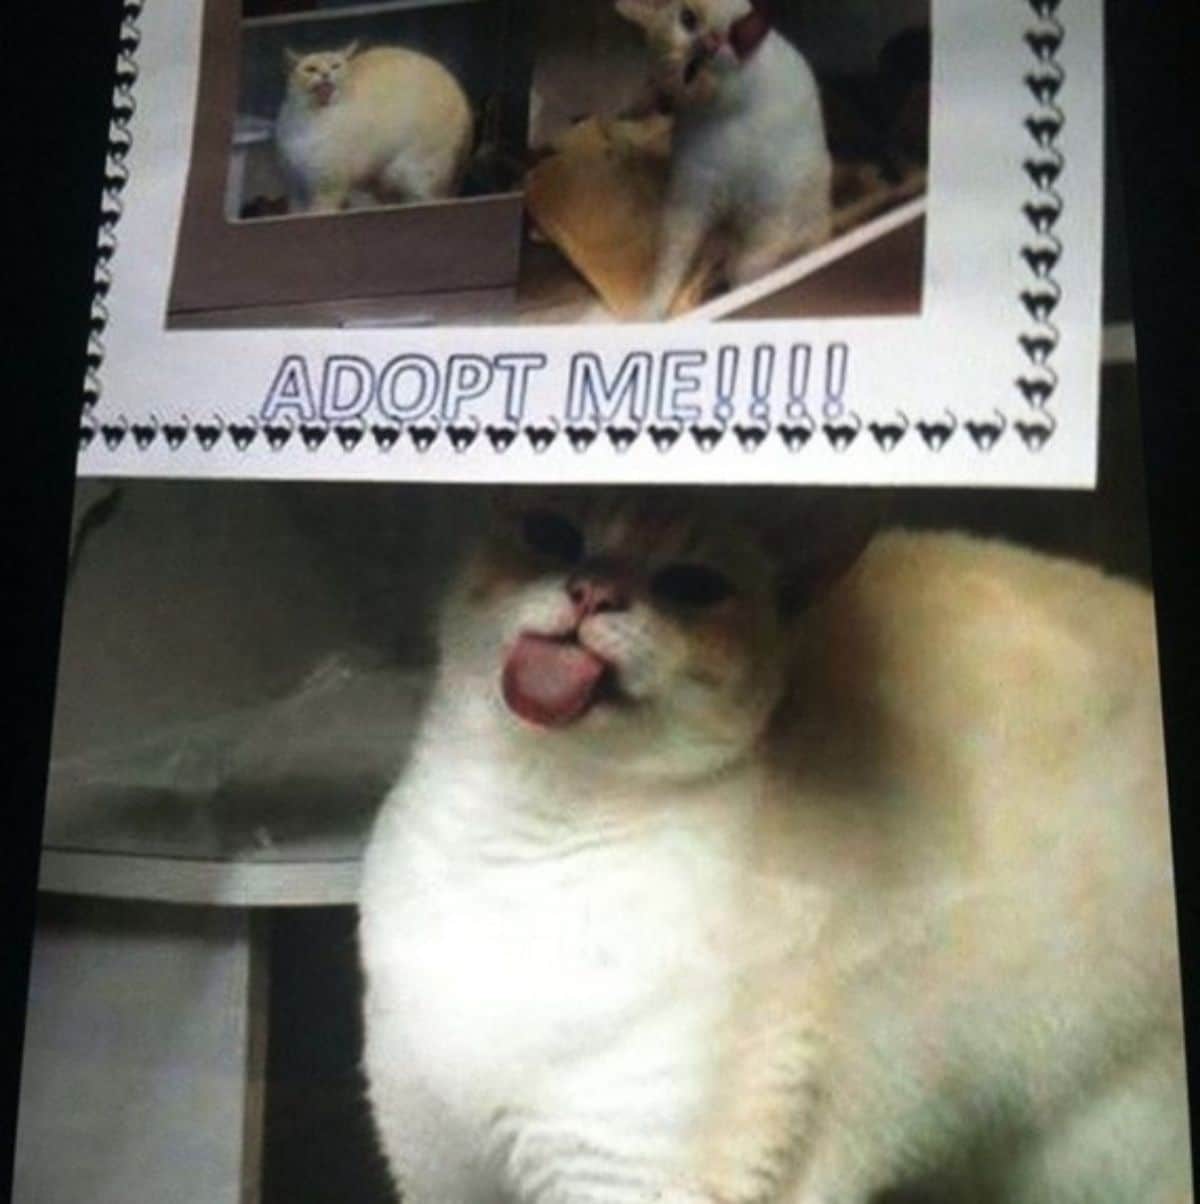 orange and white cat licking a glass under an adopt me sign